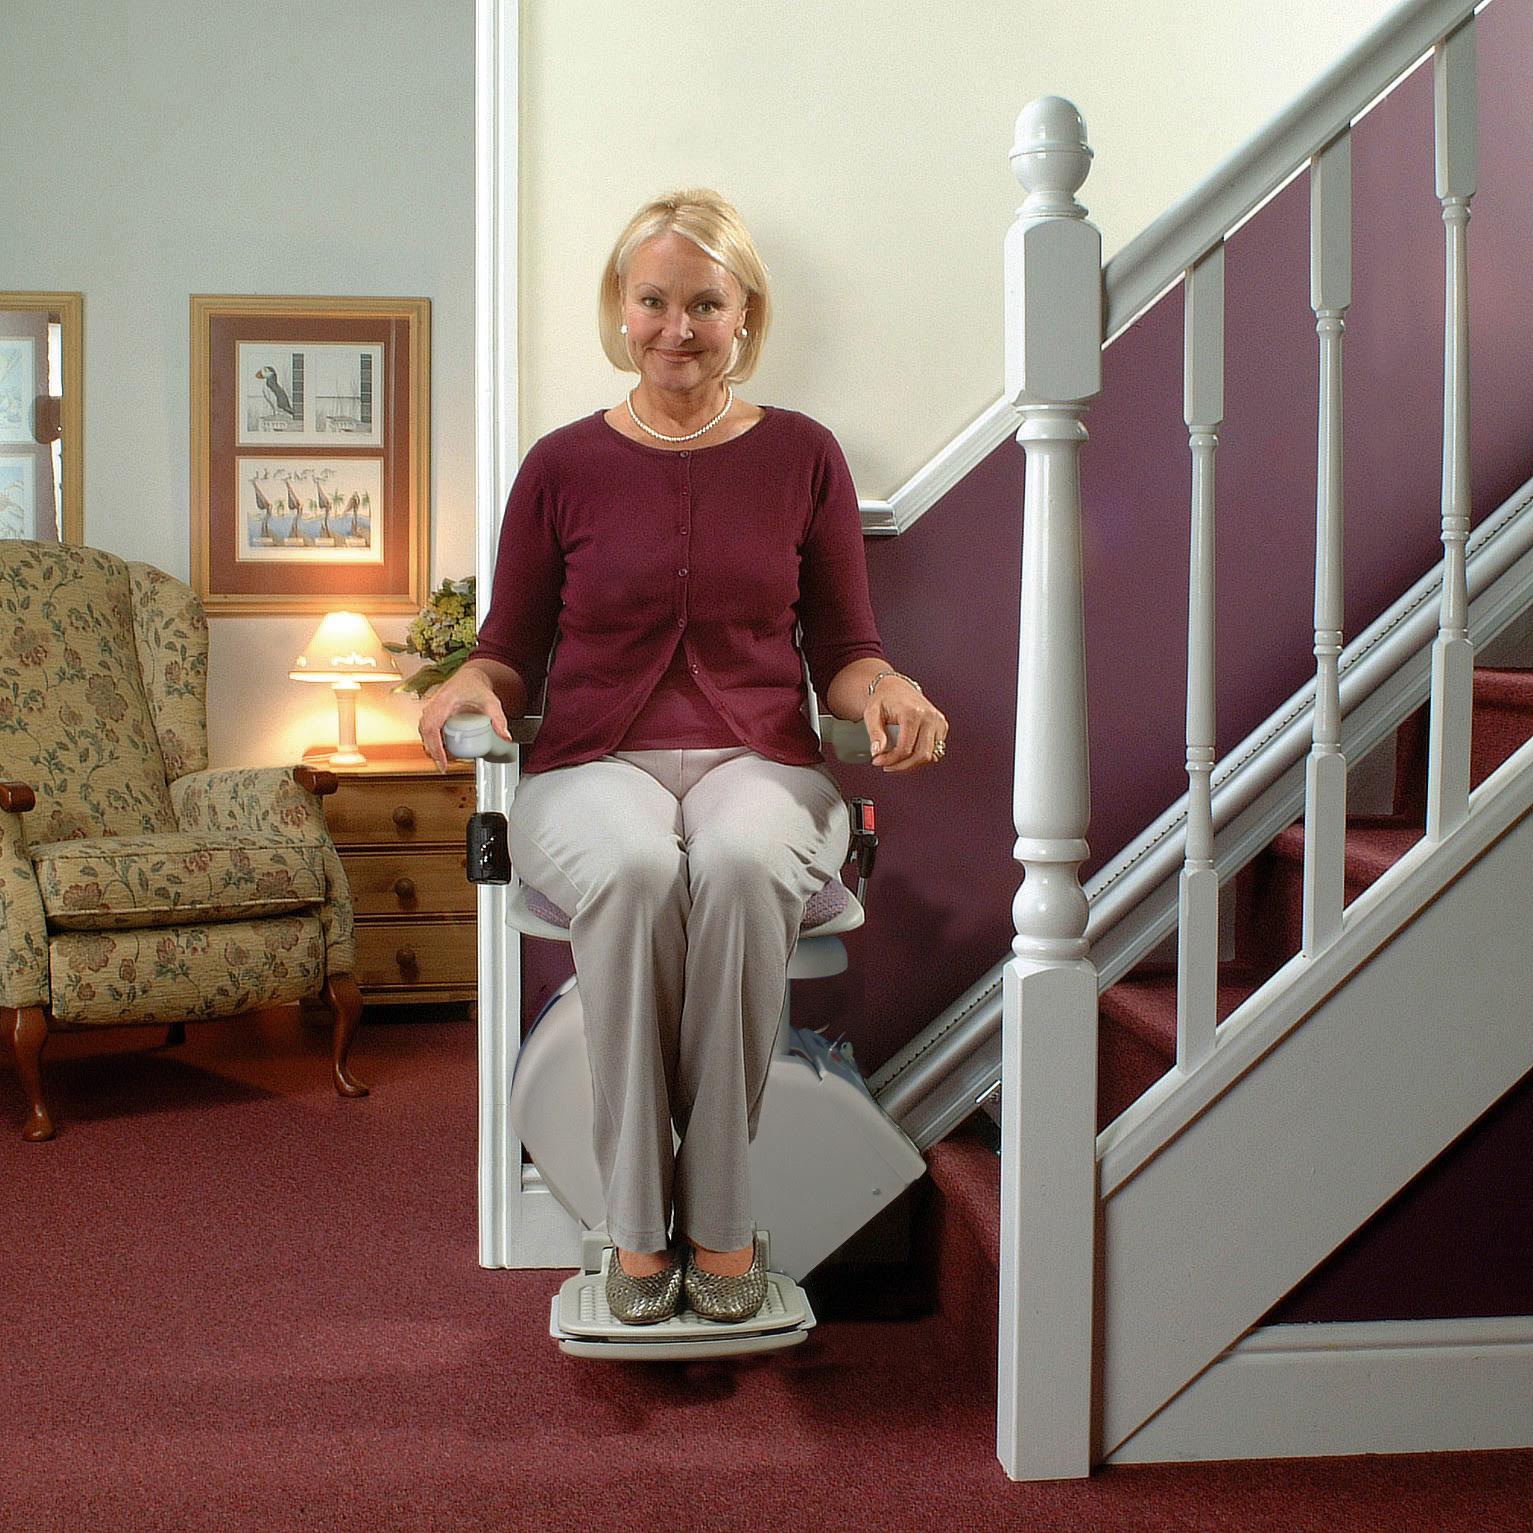 San Diego curved stair lift chair for elderly